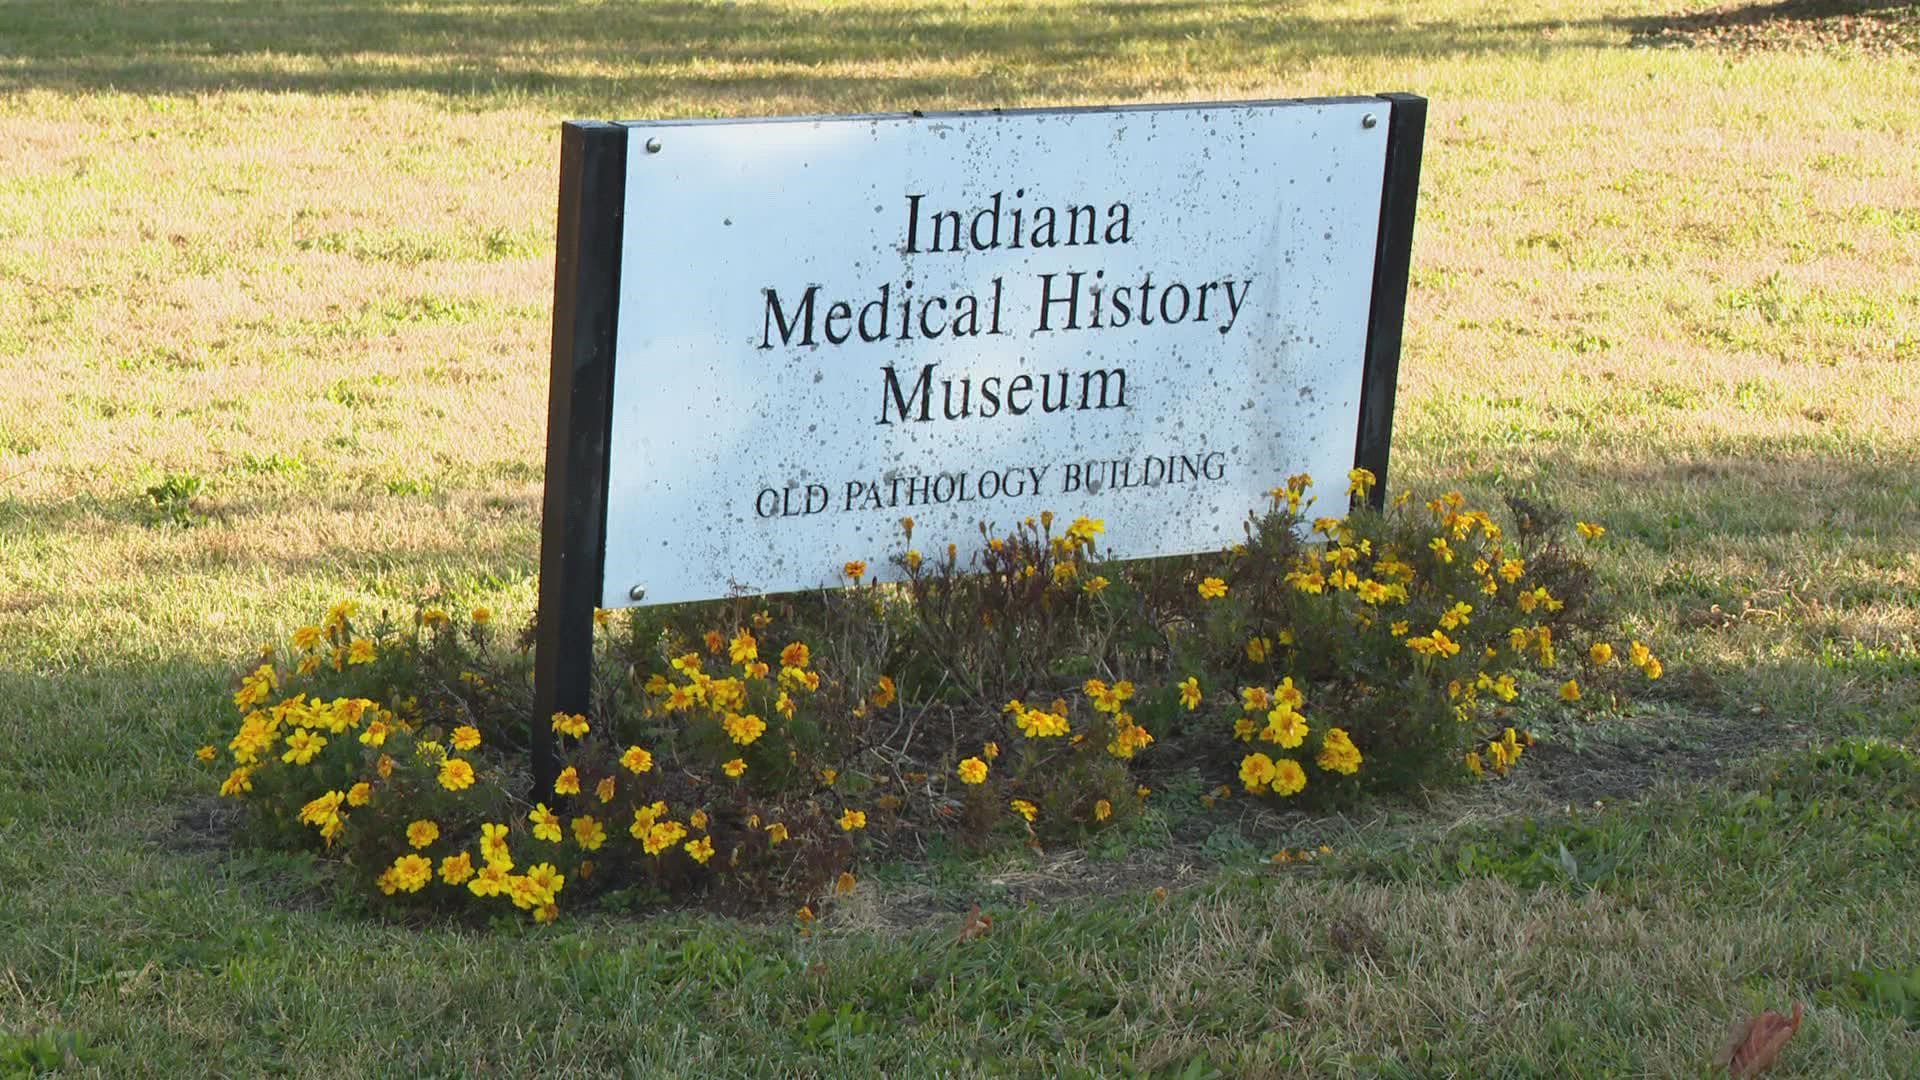 The executive director hopes the museum helps visitors remember those who have died.